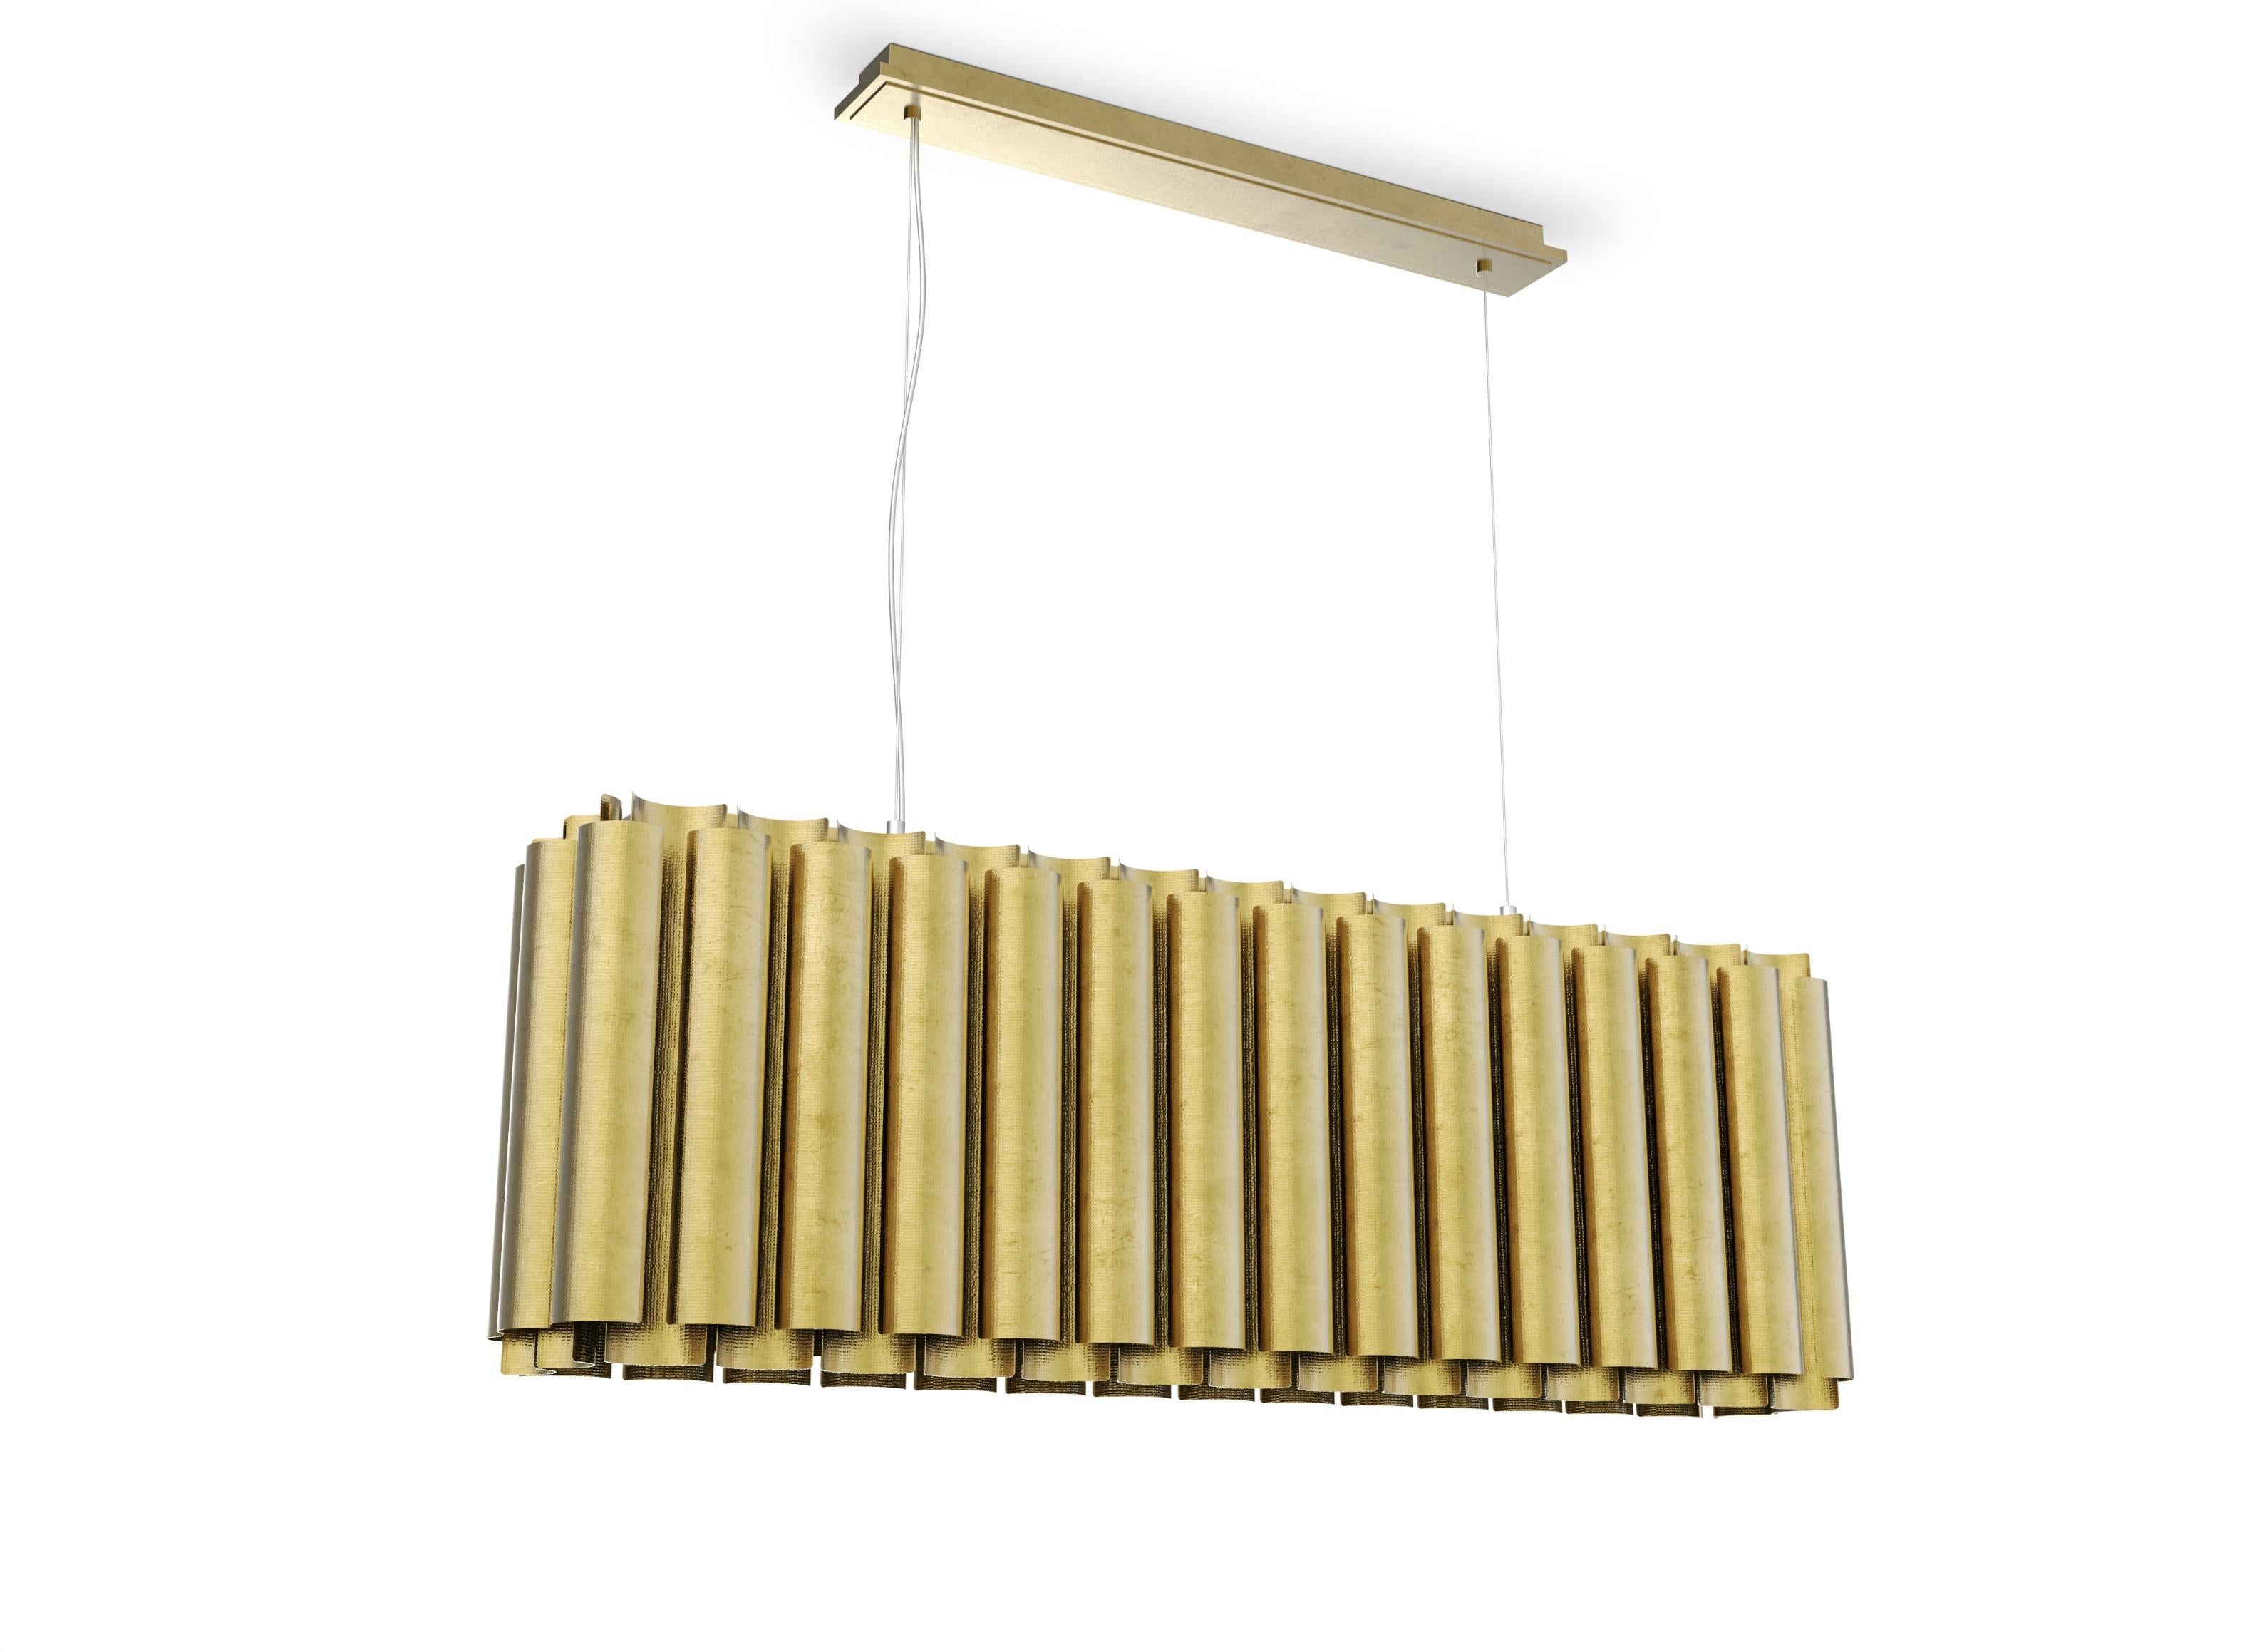 Aurum is the Latin word for gold. This imposing metal also named a contemporary lighting piece made of matte hammered brass. With a unique design, AURUM Suspension Light will bring comfort in the darkest nights with its warm yet sensitive light.